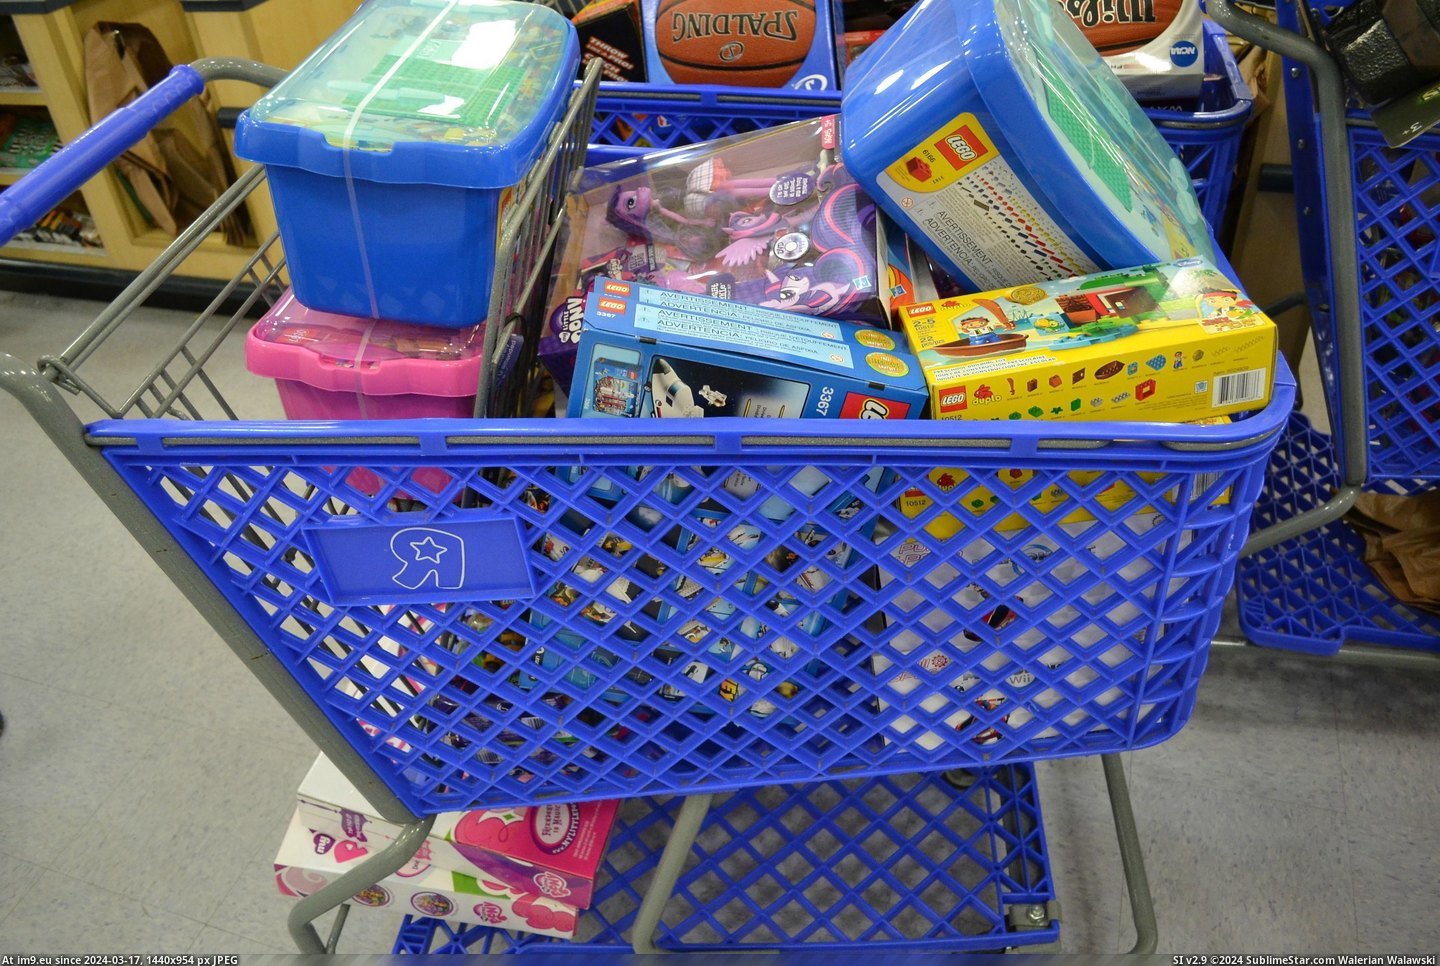 #For #Happy #All #Bunch #Tots #Donated #Christmas #Toys #Kids [Pics] Hopefully this makes a bunch of kids happy this Christmas all donated to Toys for Tots. 4 Pic. (Image of album My r/PICS favs))